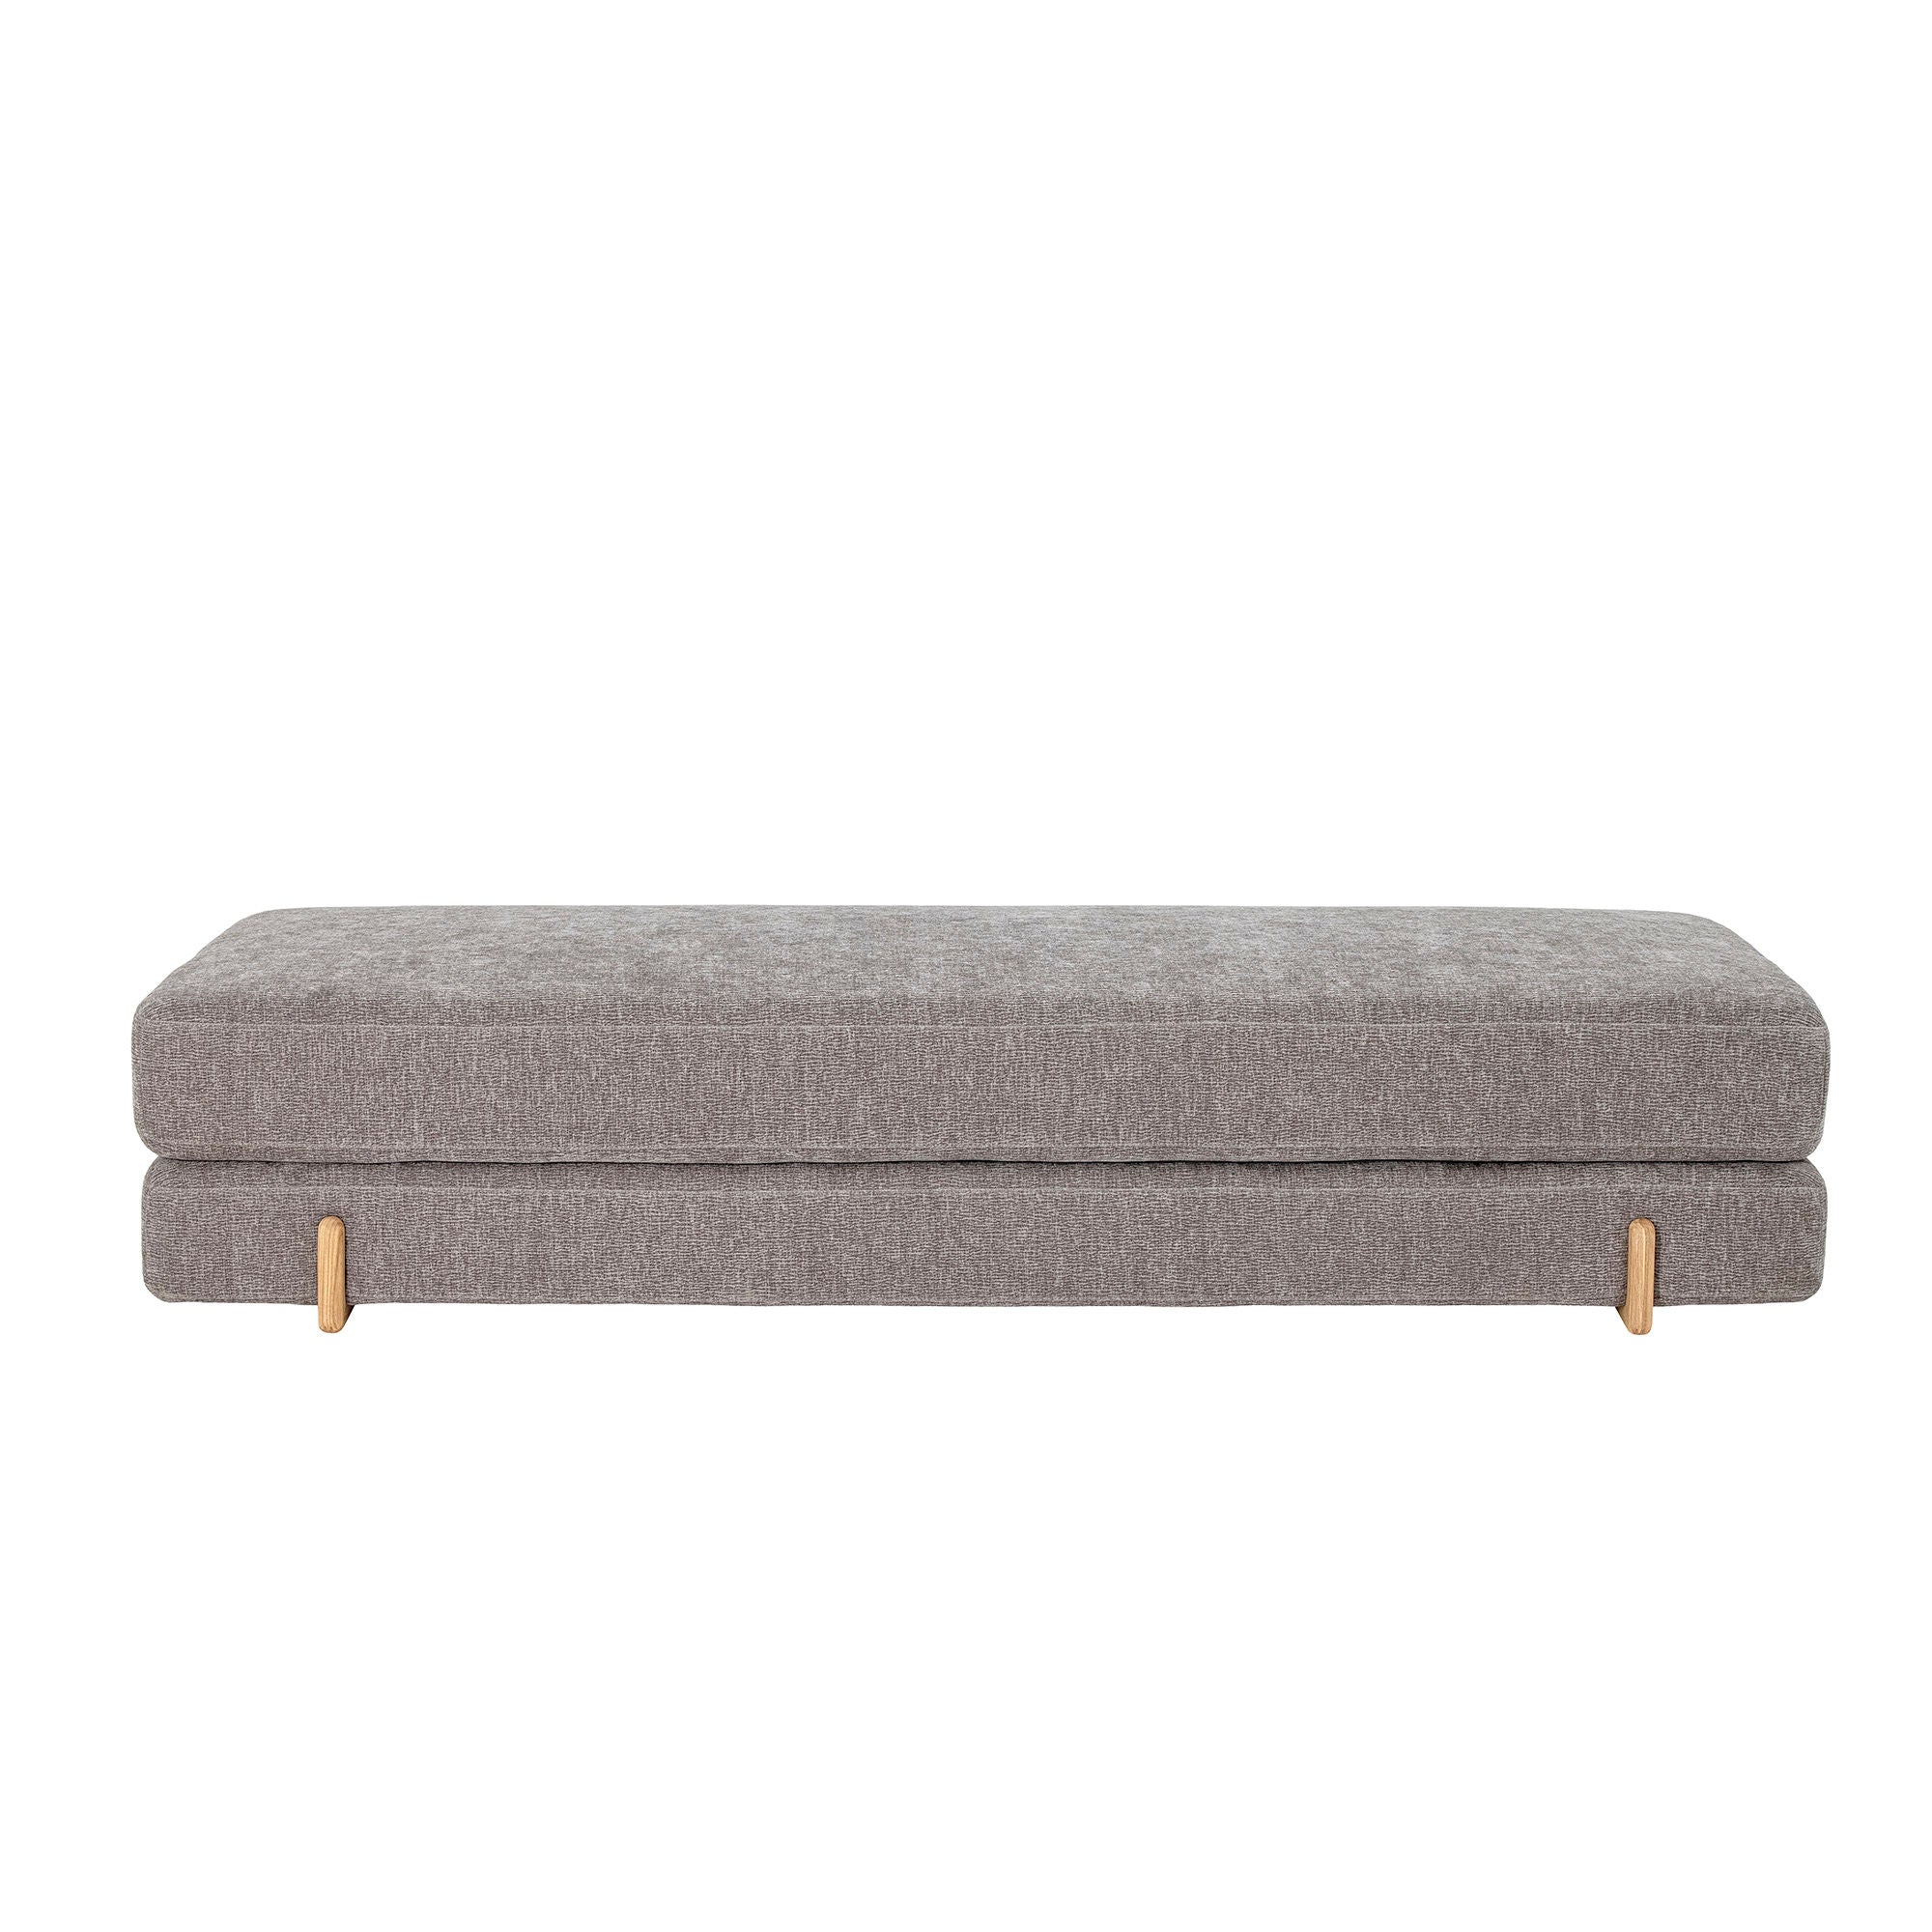 Bloomingville Groove Daybed, gris, poliéster